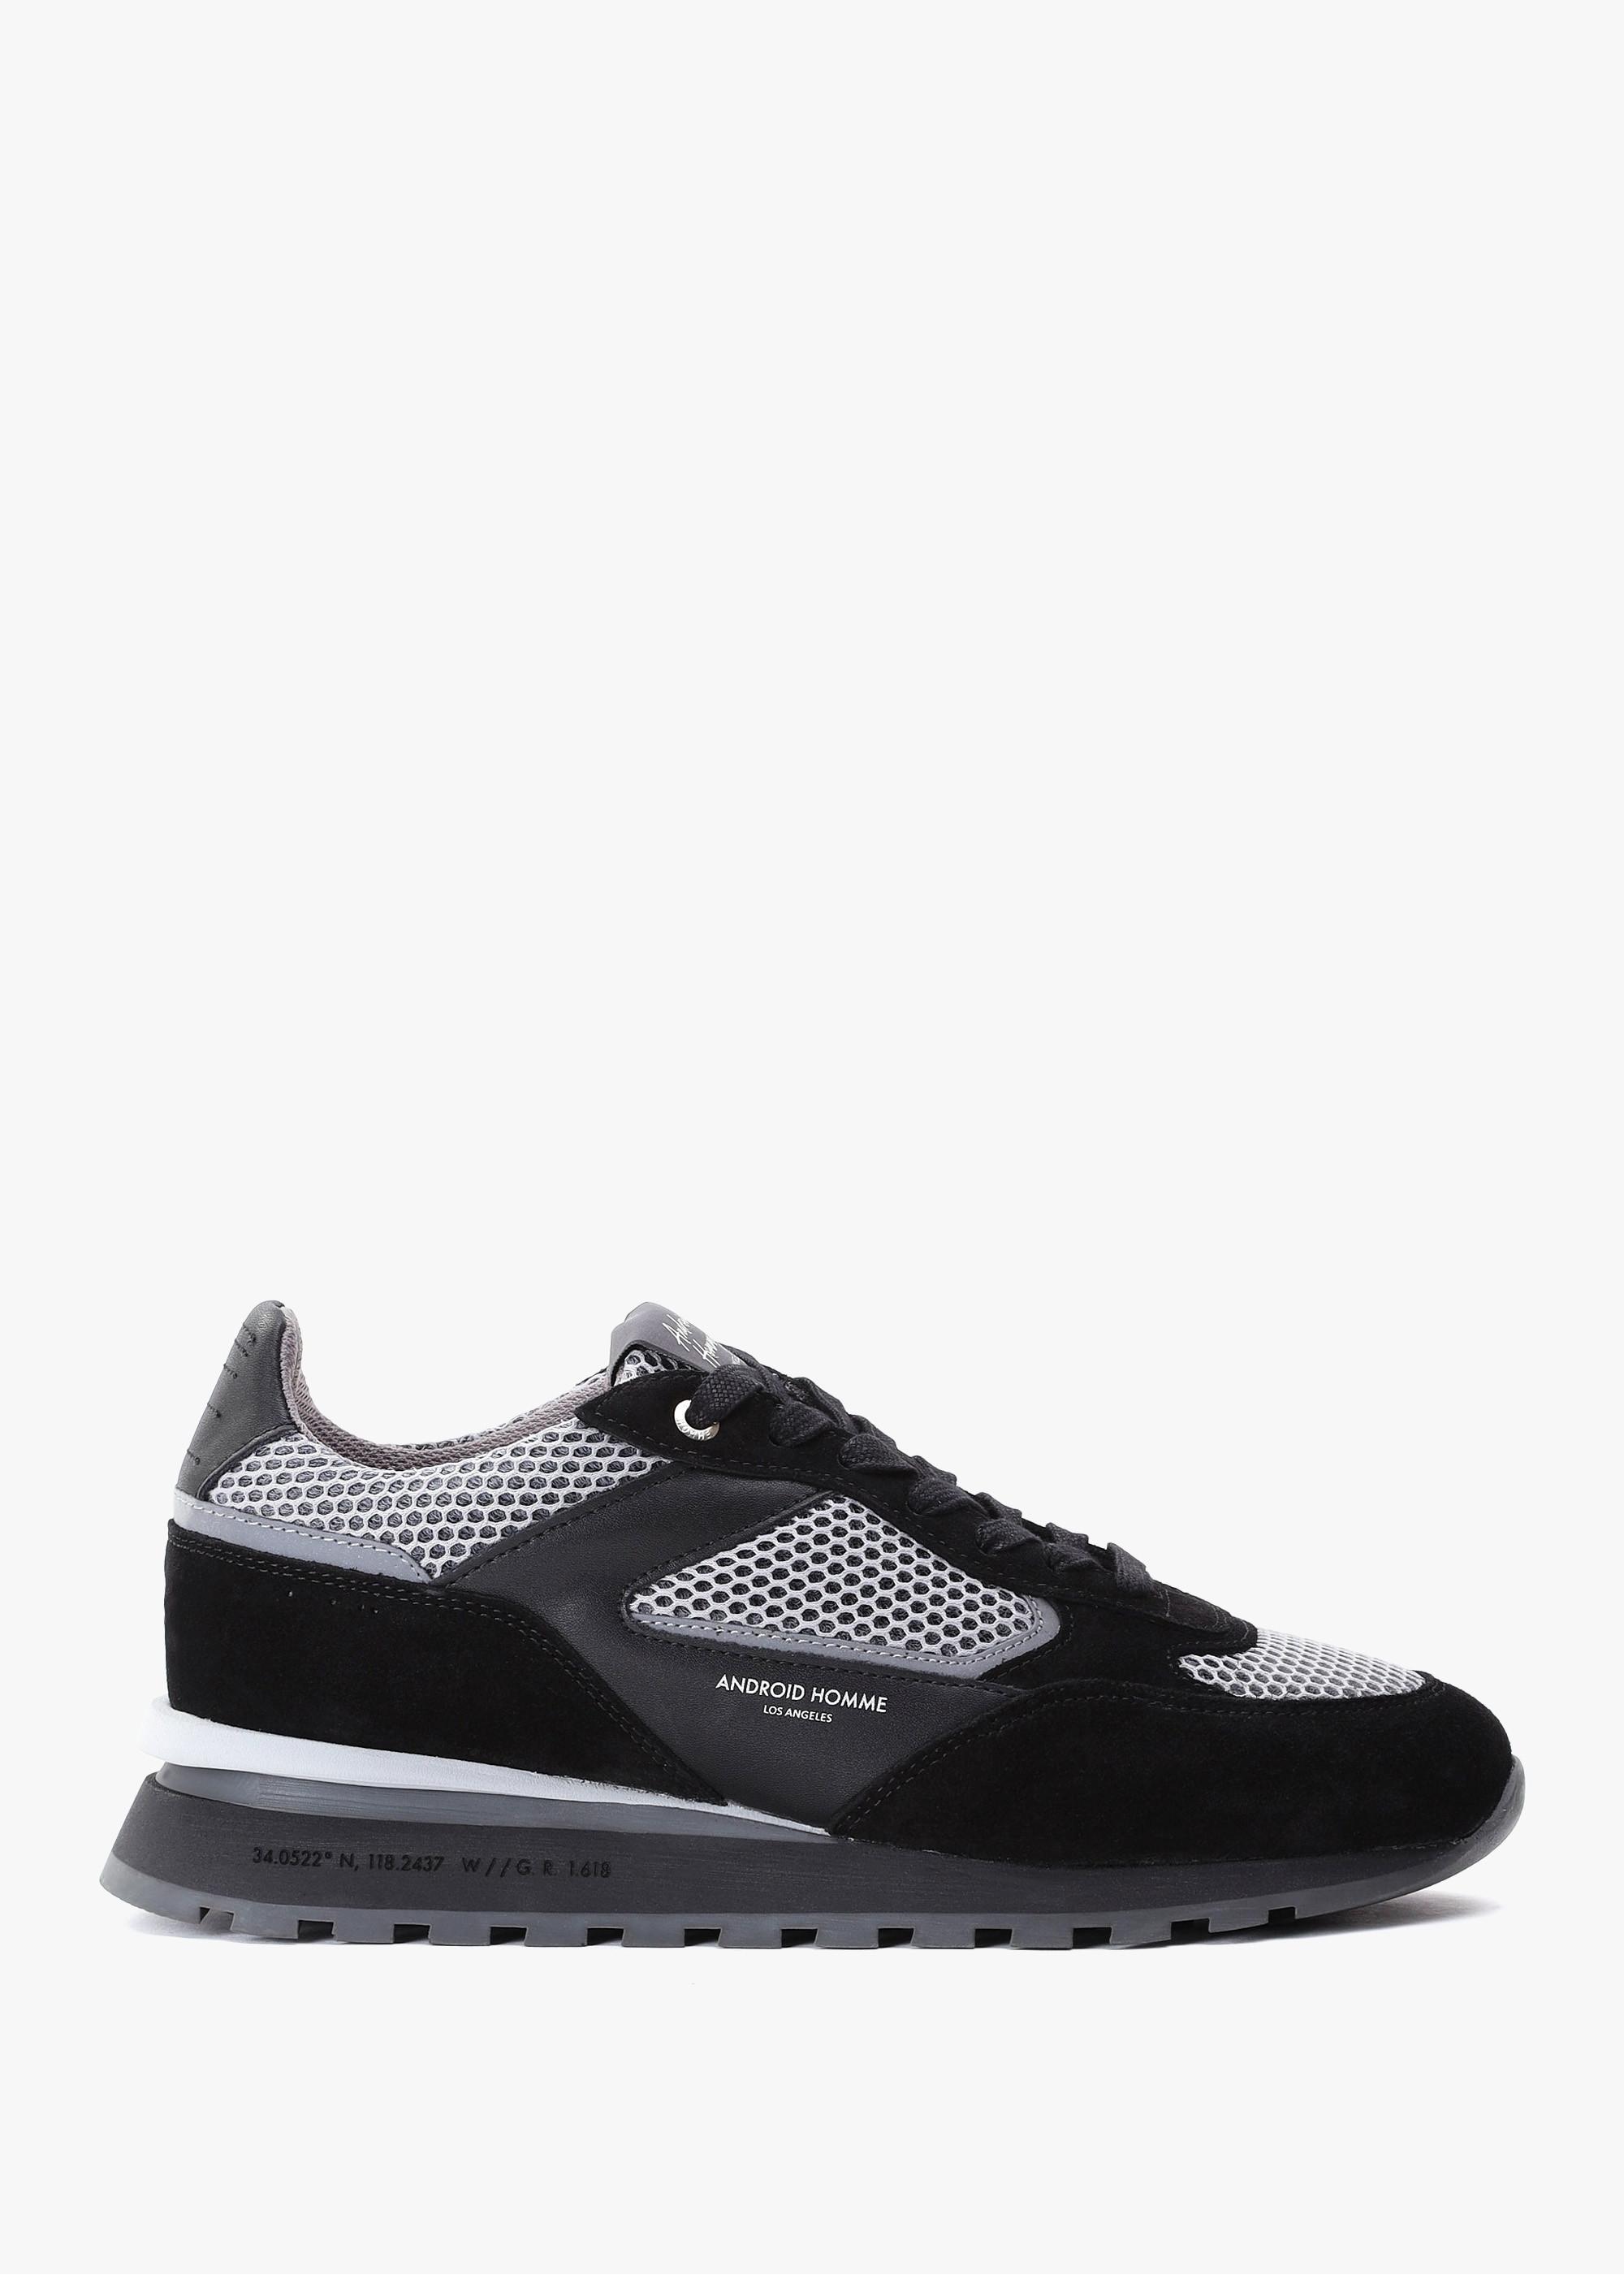 android-homme-mens-lechuza-racer-trainers-in-black